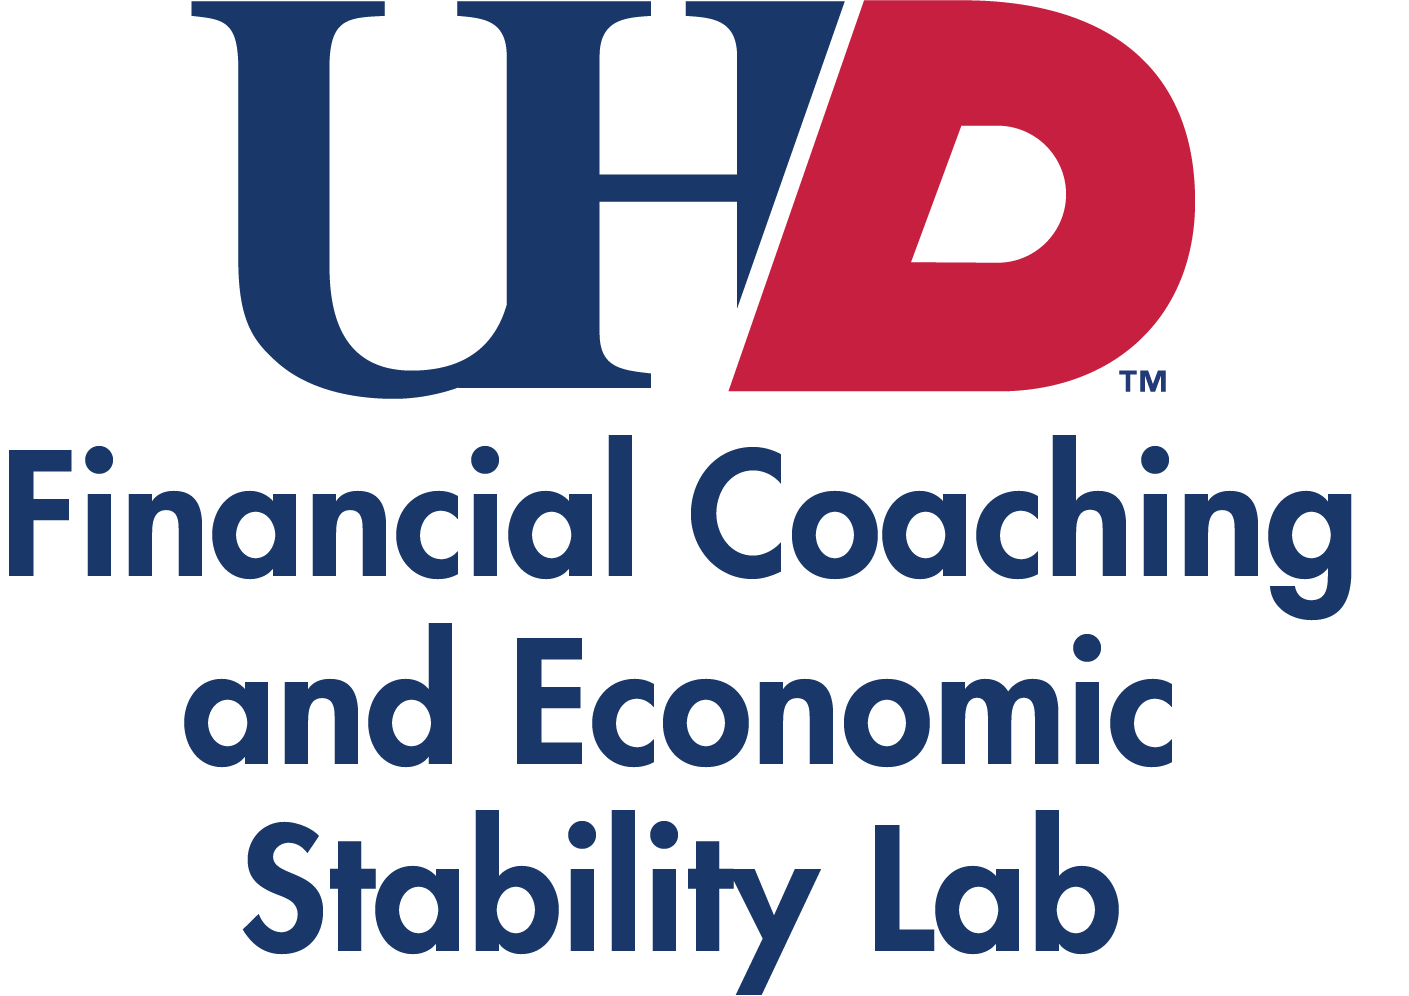 Financial Coaching and Economic Stability Lab logo